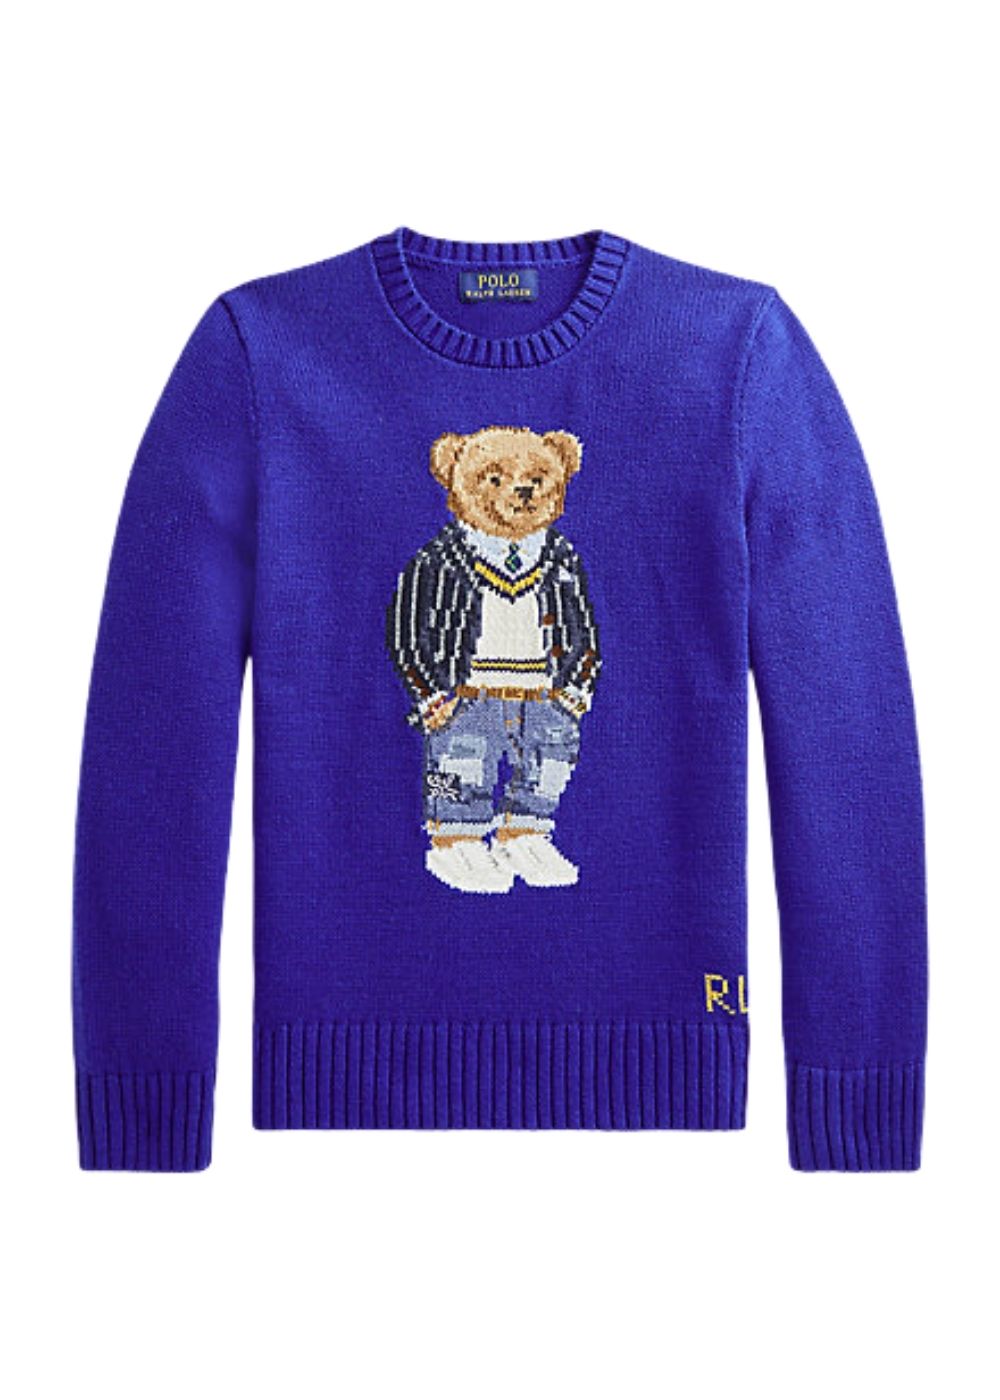 Featured image for “Polo Ralph Lauren Maglia Bear”